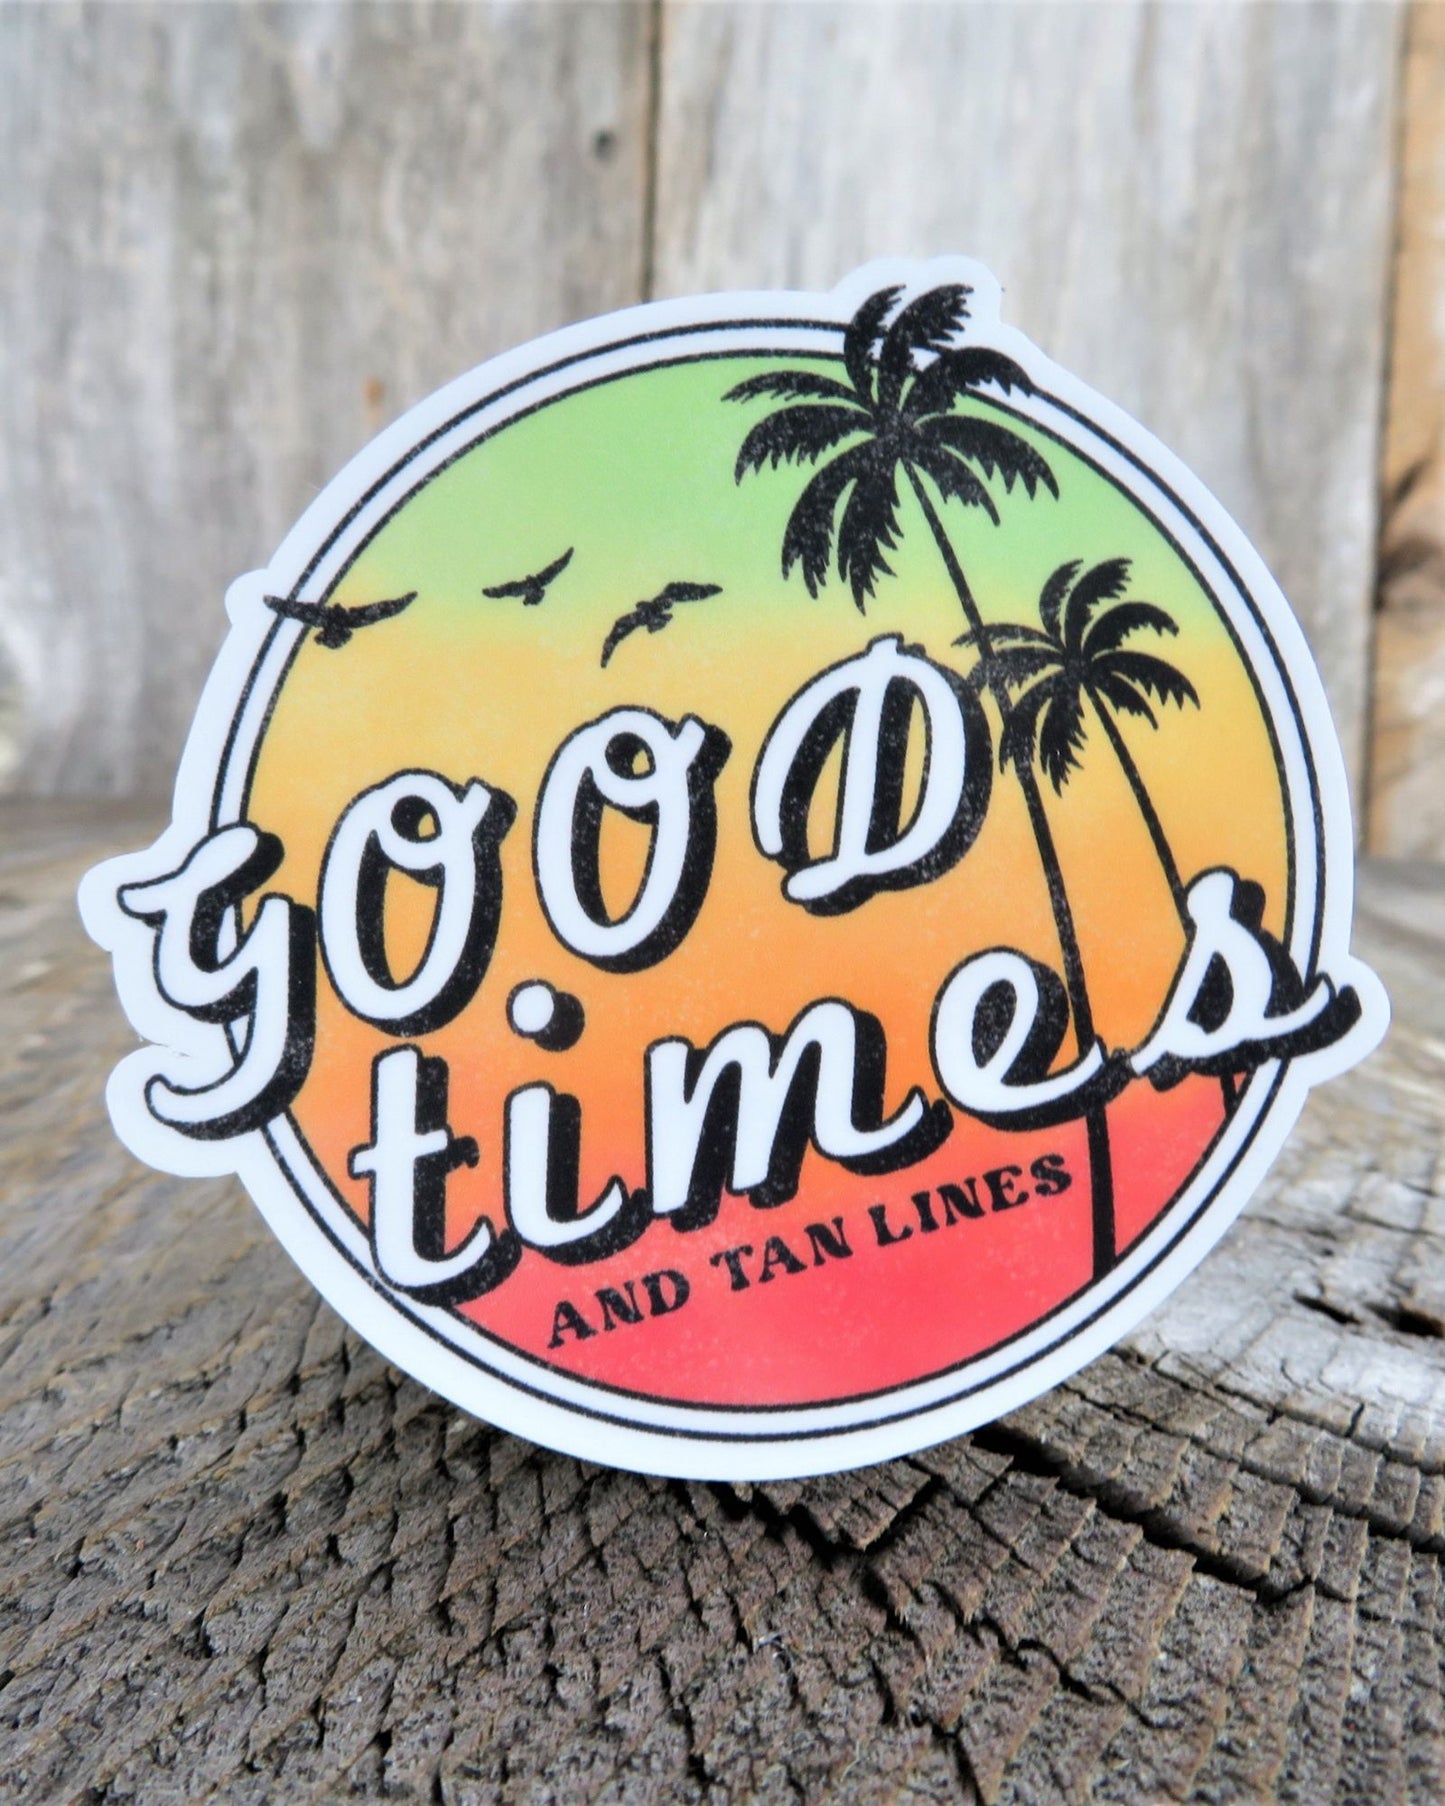 Good Times and Tan Lines Sticker Beach Summer Retro Colored Decal Palm Tree Waterproof Car Water Bottle Laptop